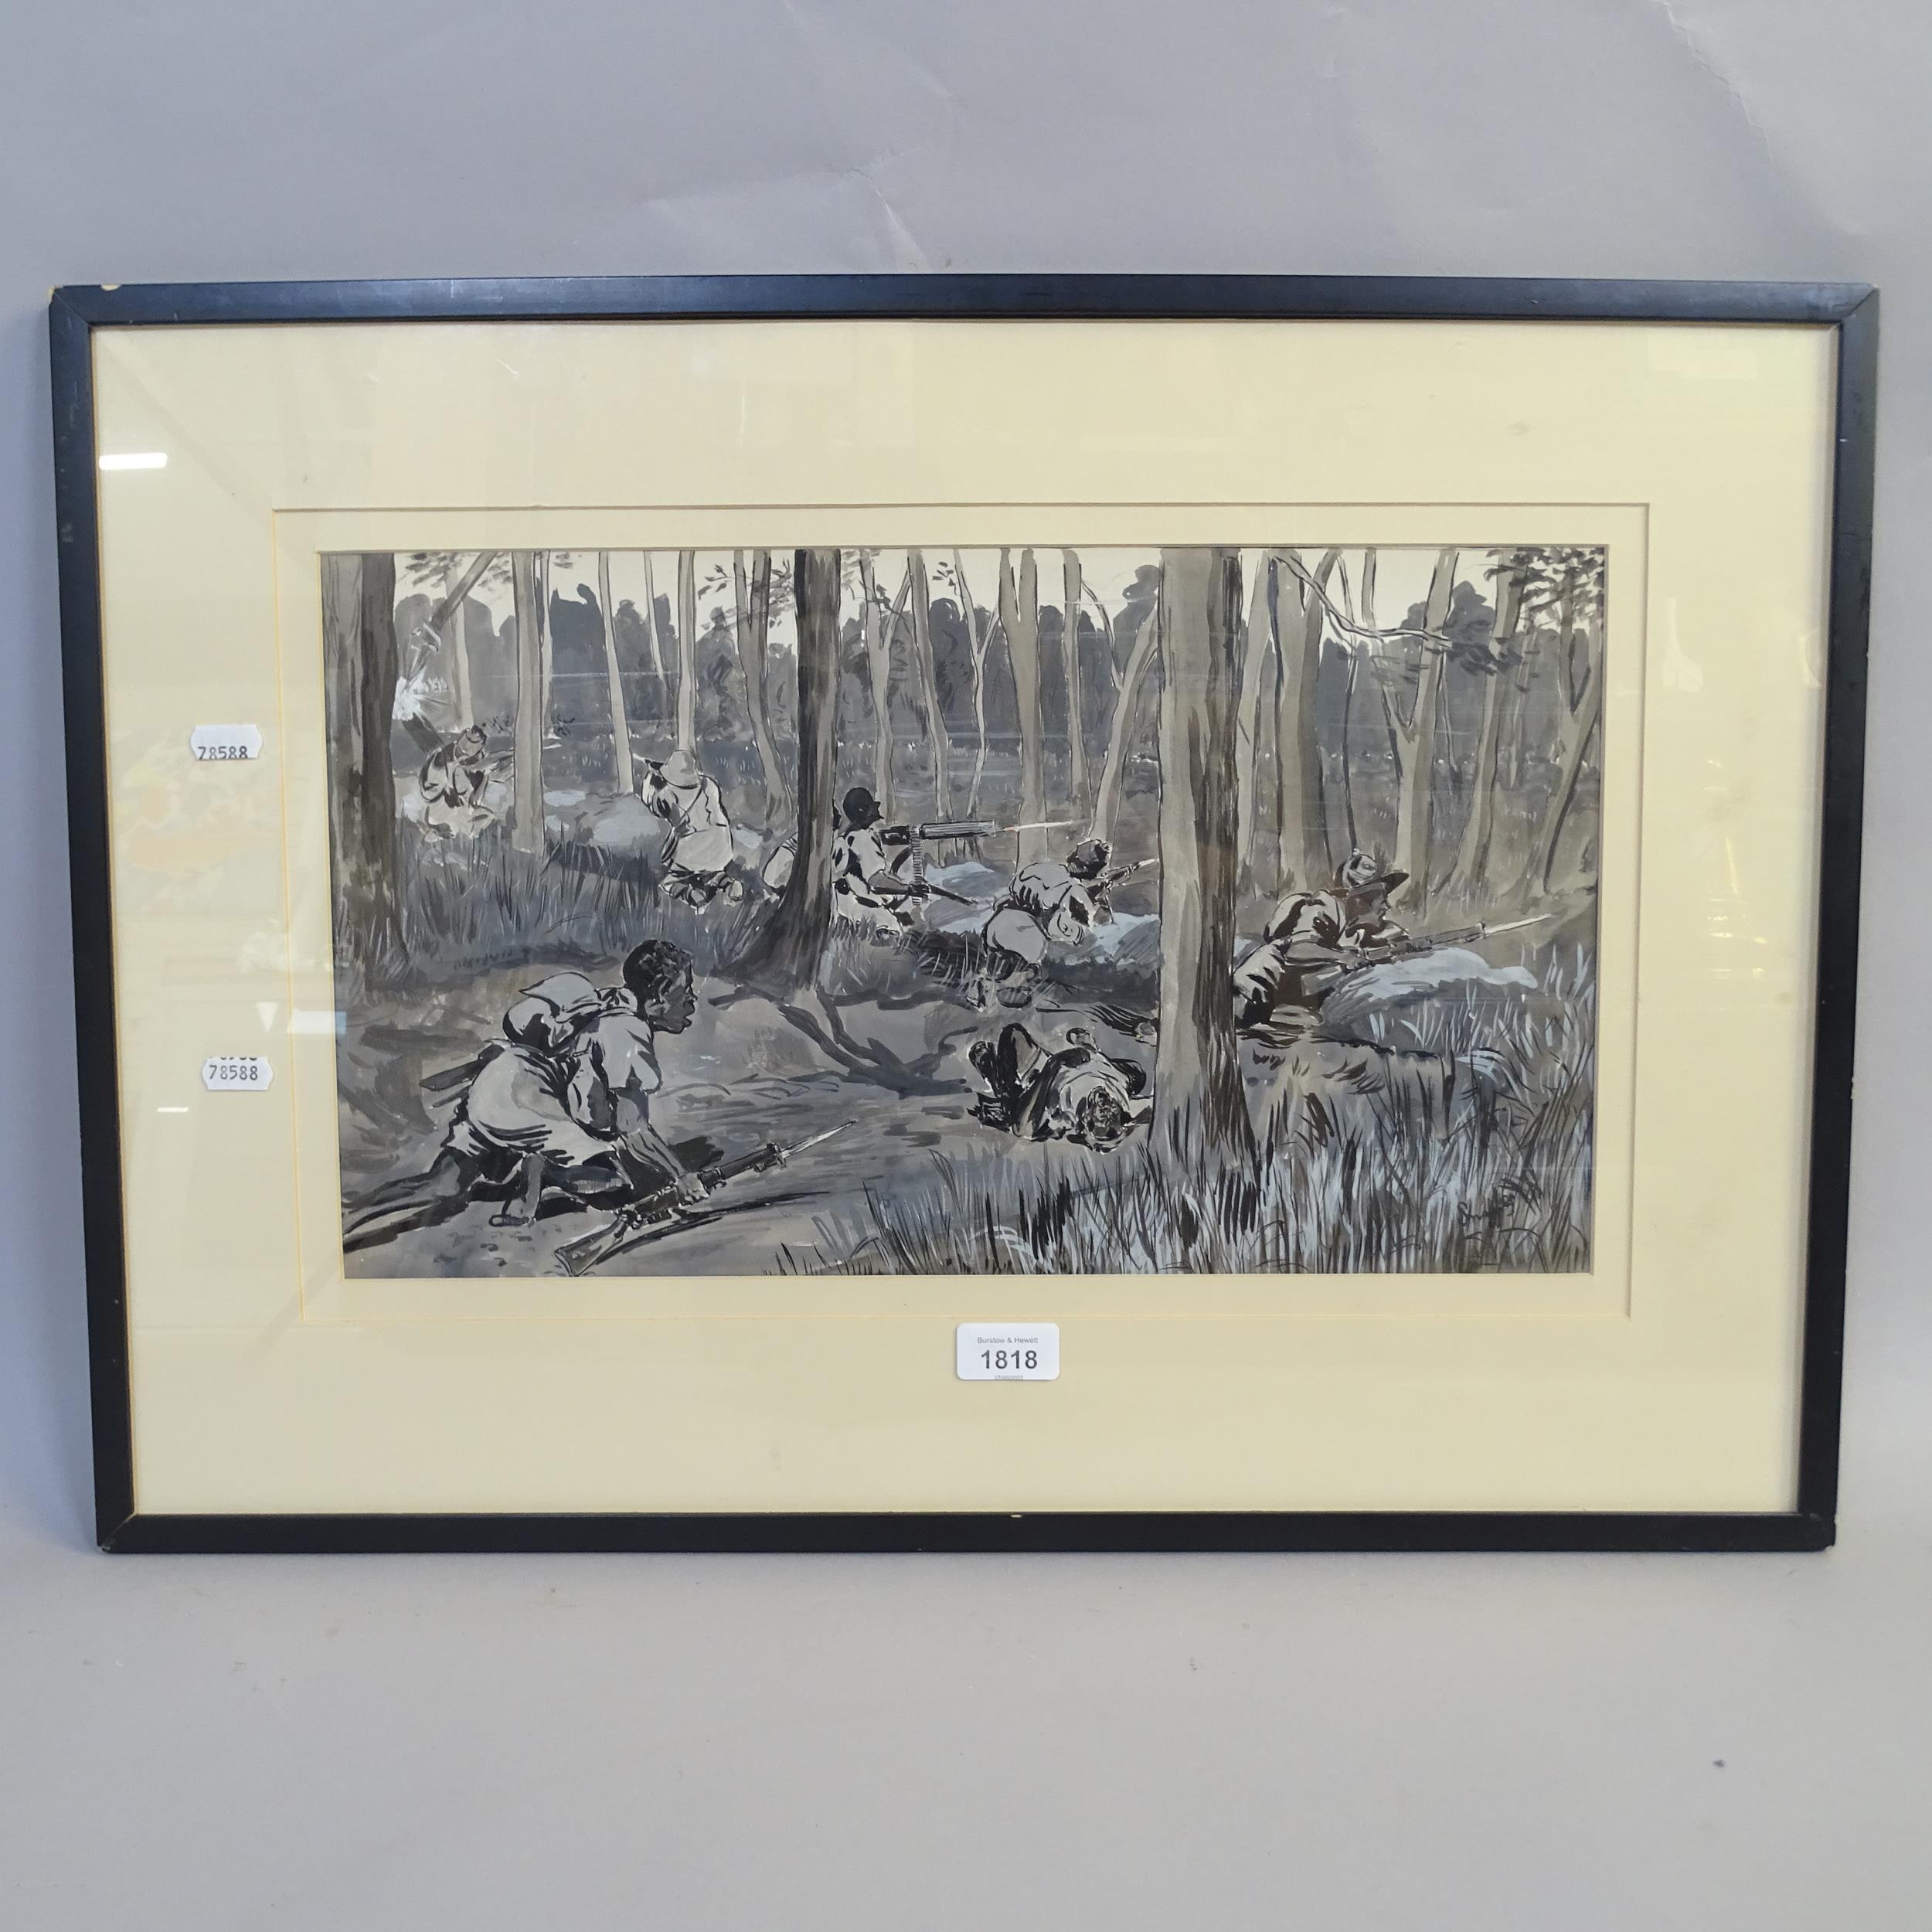 Snaffles (1884-1967), an original watercolour and ink drawing, "Action in the Cameroons", possibly